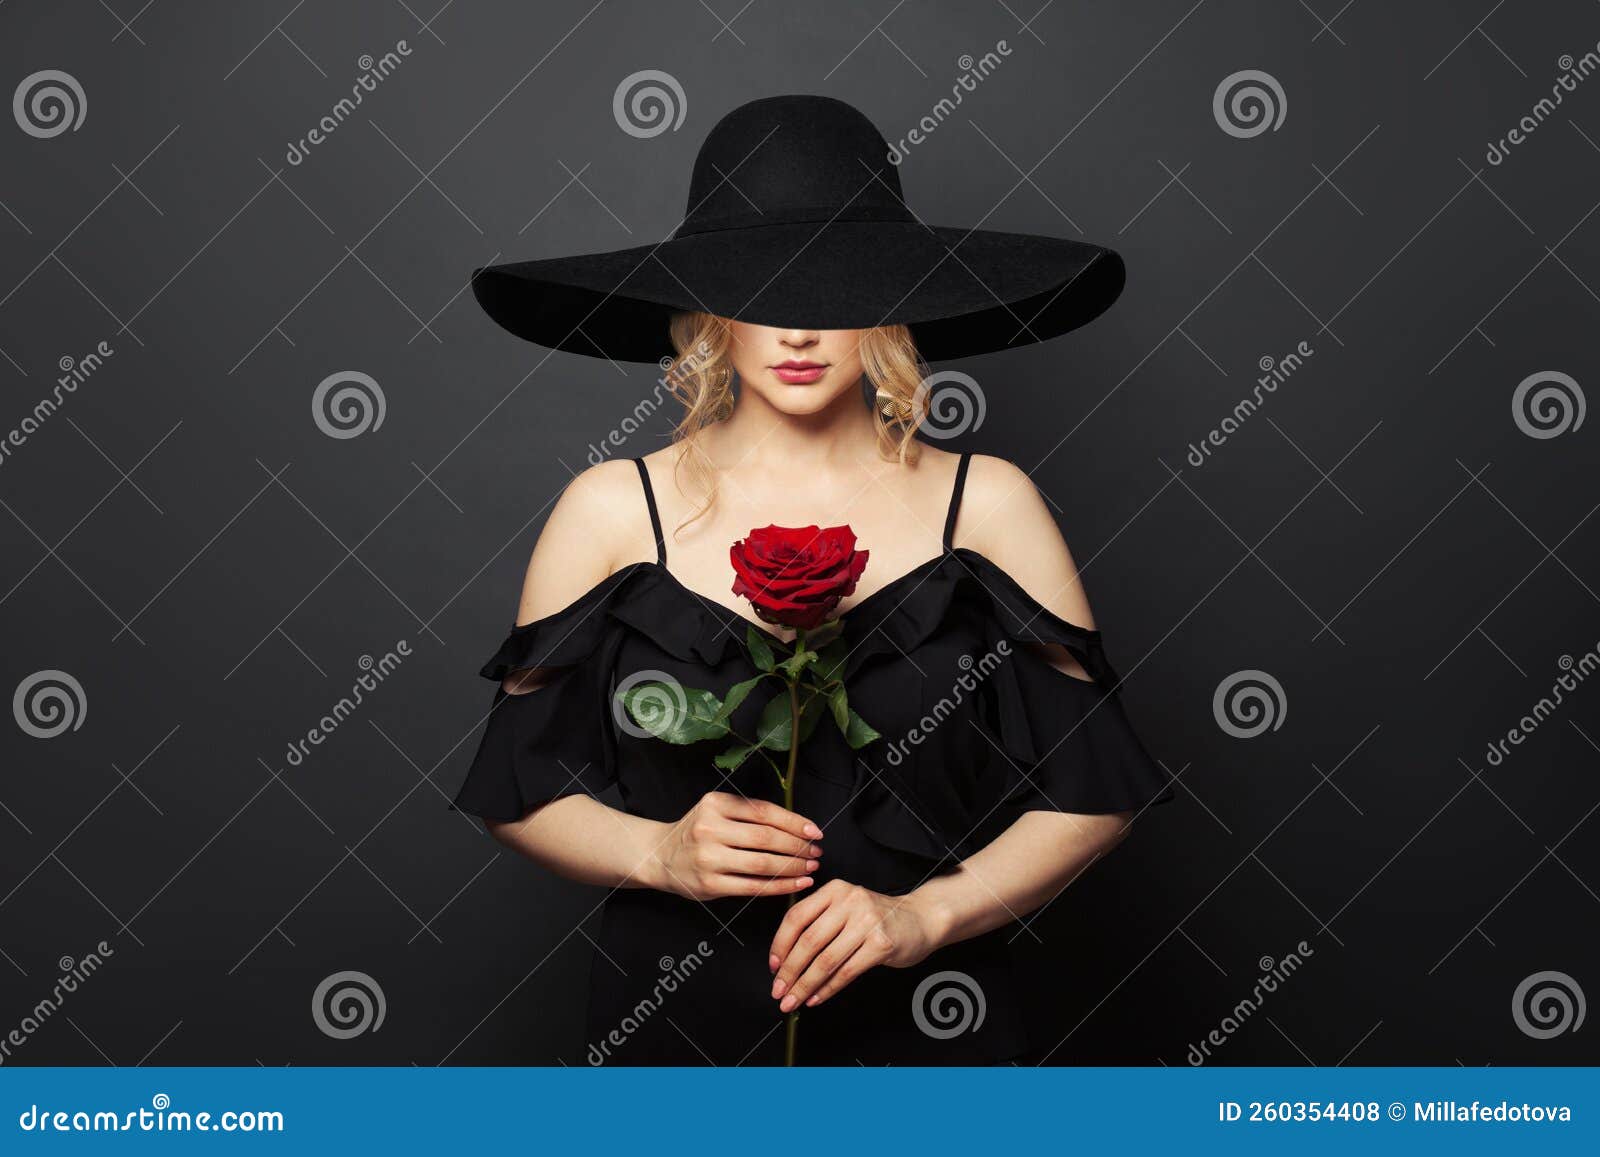 Beautiful Passionate Woman Wearing Wide Black Broad Brim Hat with